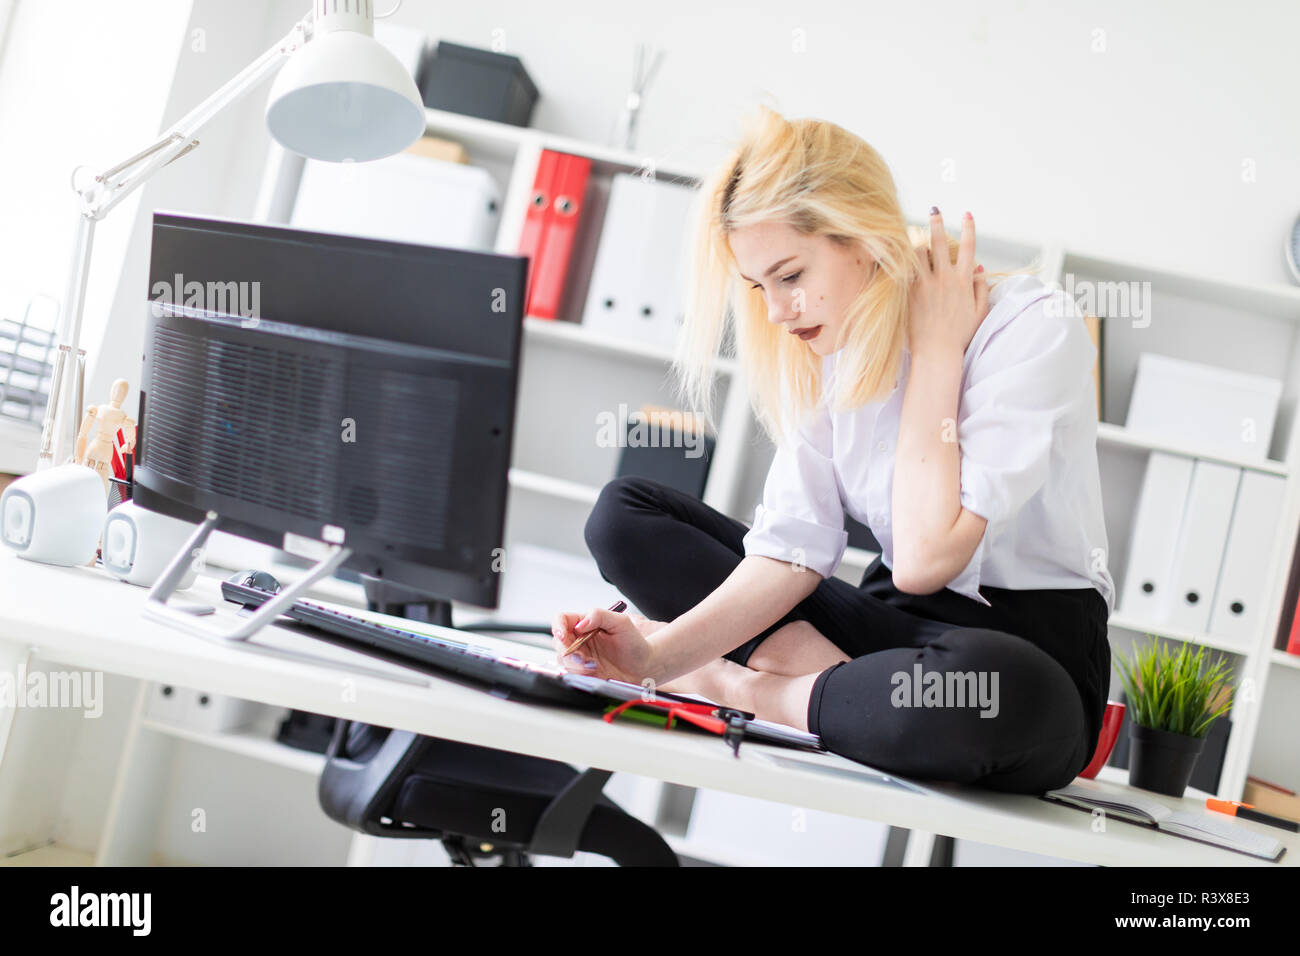 A young girl sitting on a Desk in the office and working with documents and computer. Stock Photo